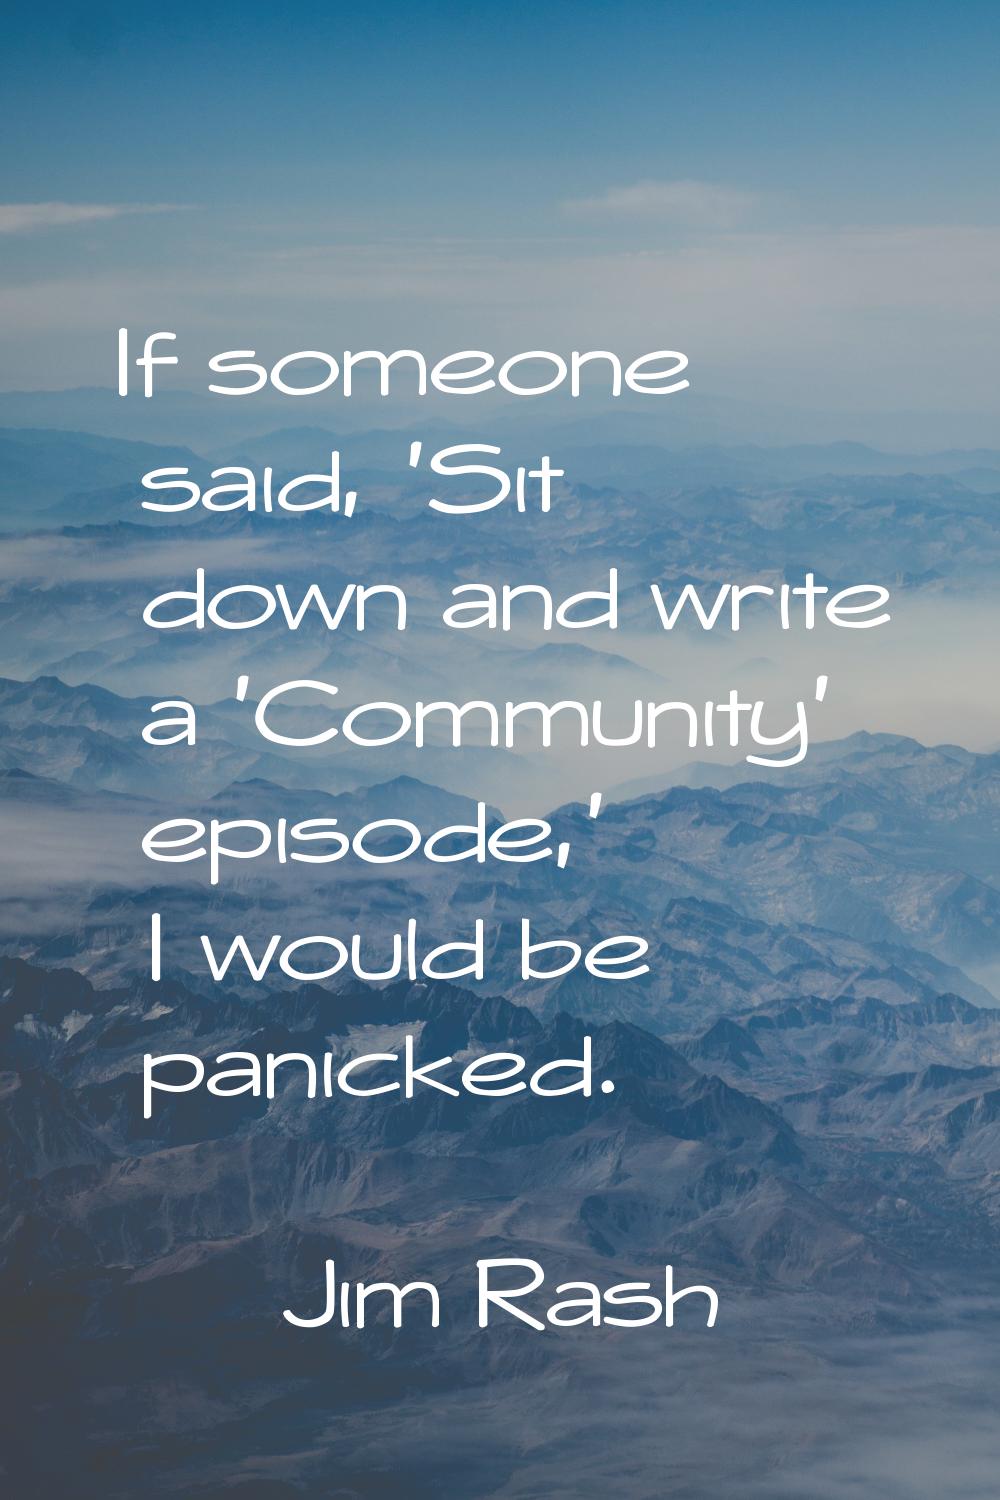 If someone said, 'Sit down and write a 'Community' episode,' I would be panicked.